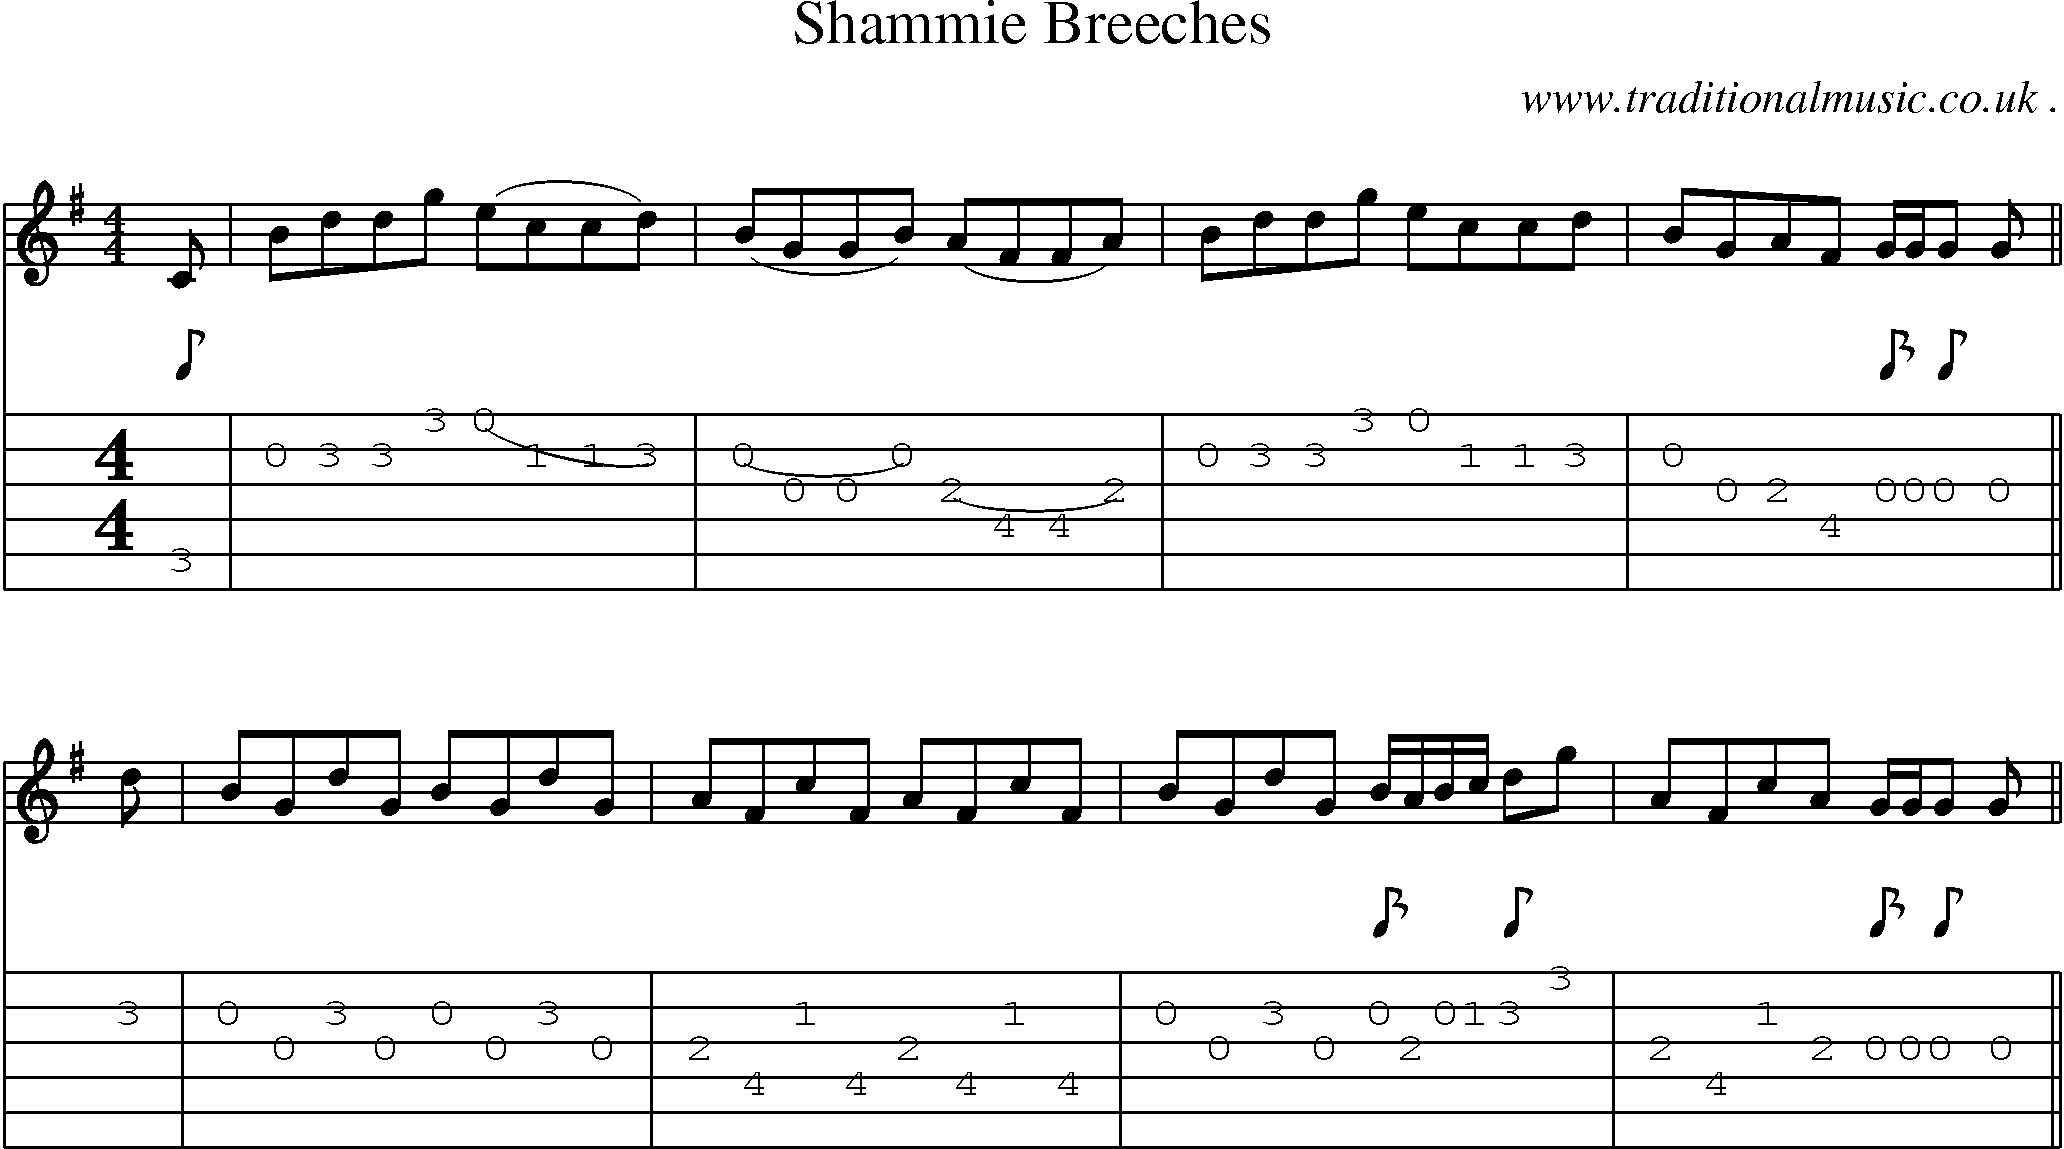 Sheet-Music and Guitar Tabs for Shammie Breeches